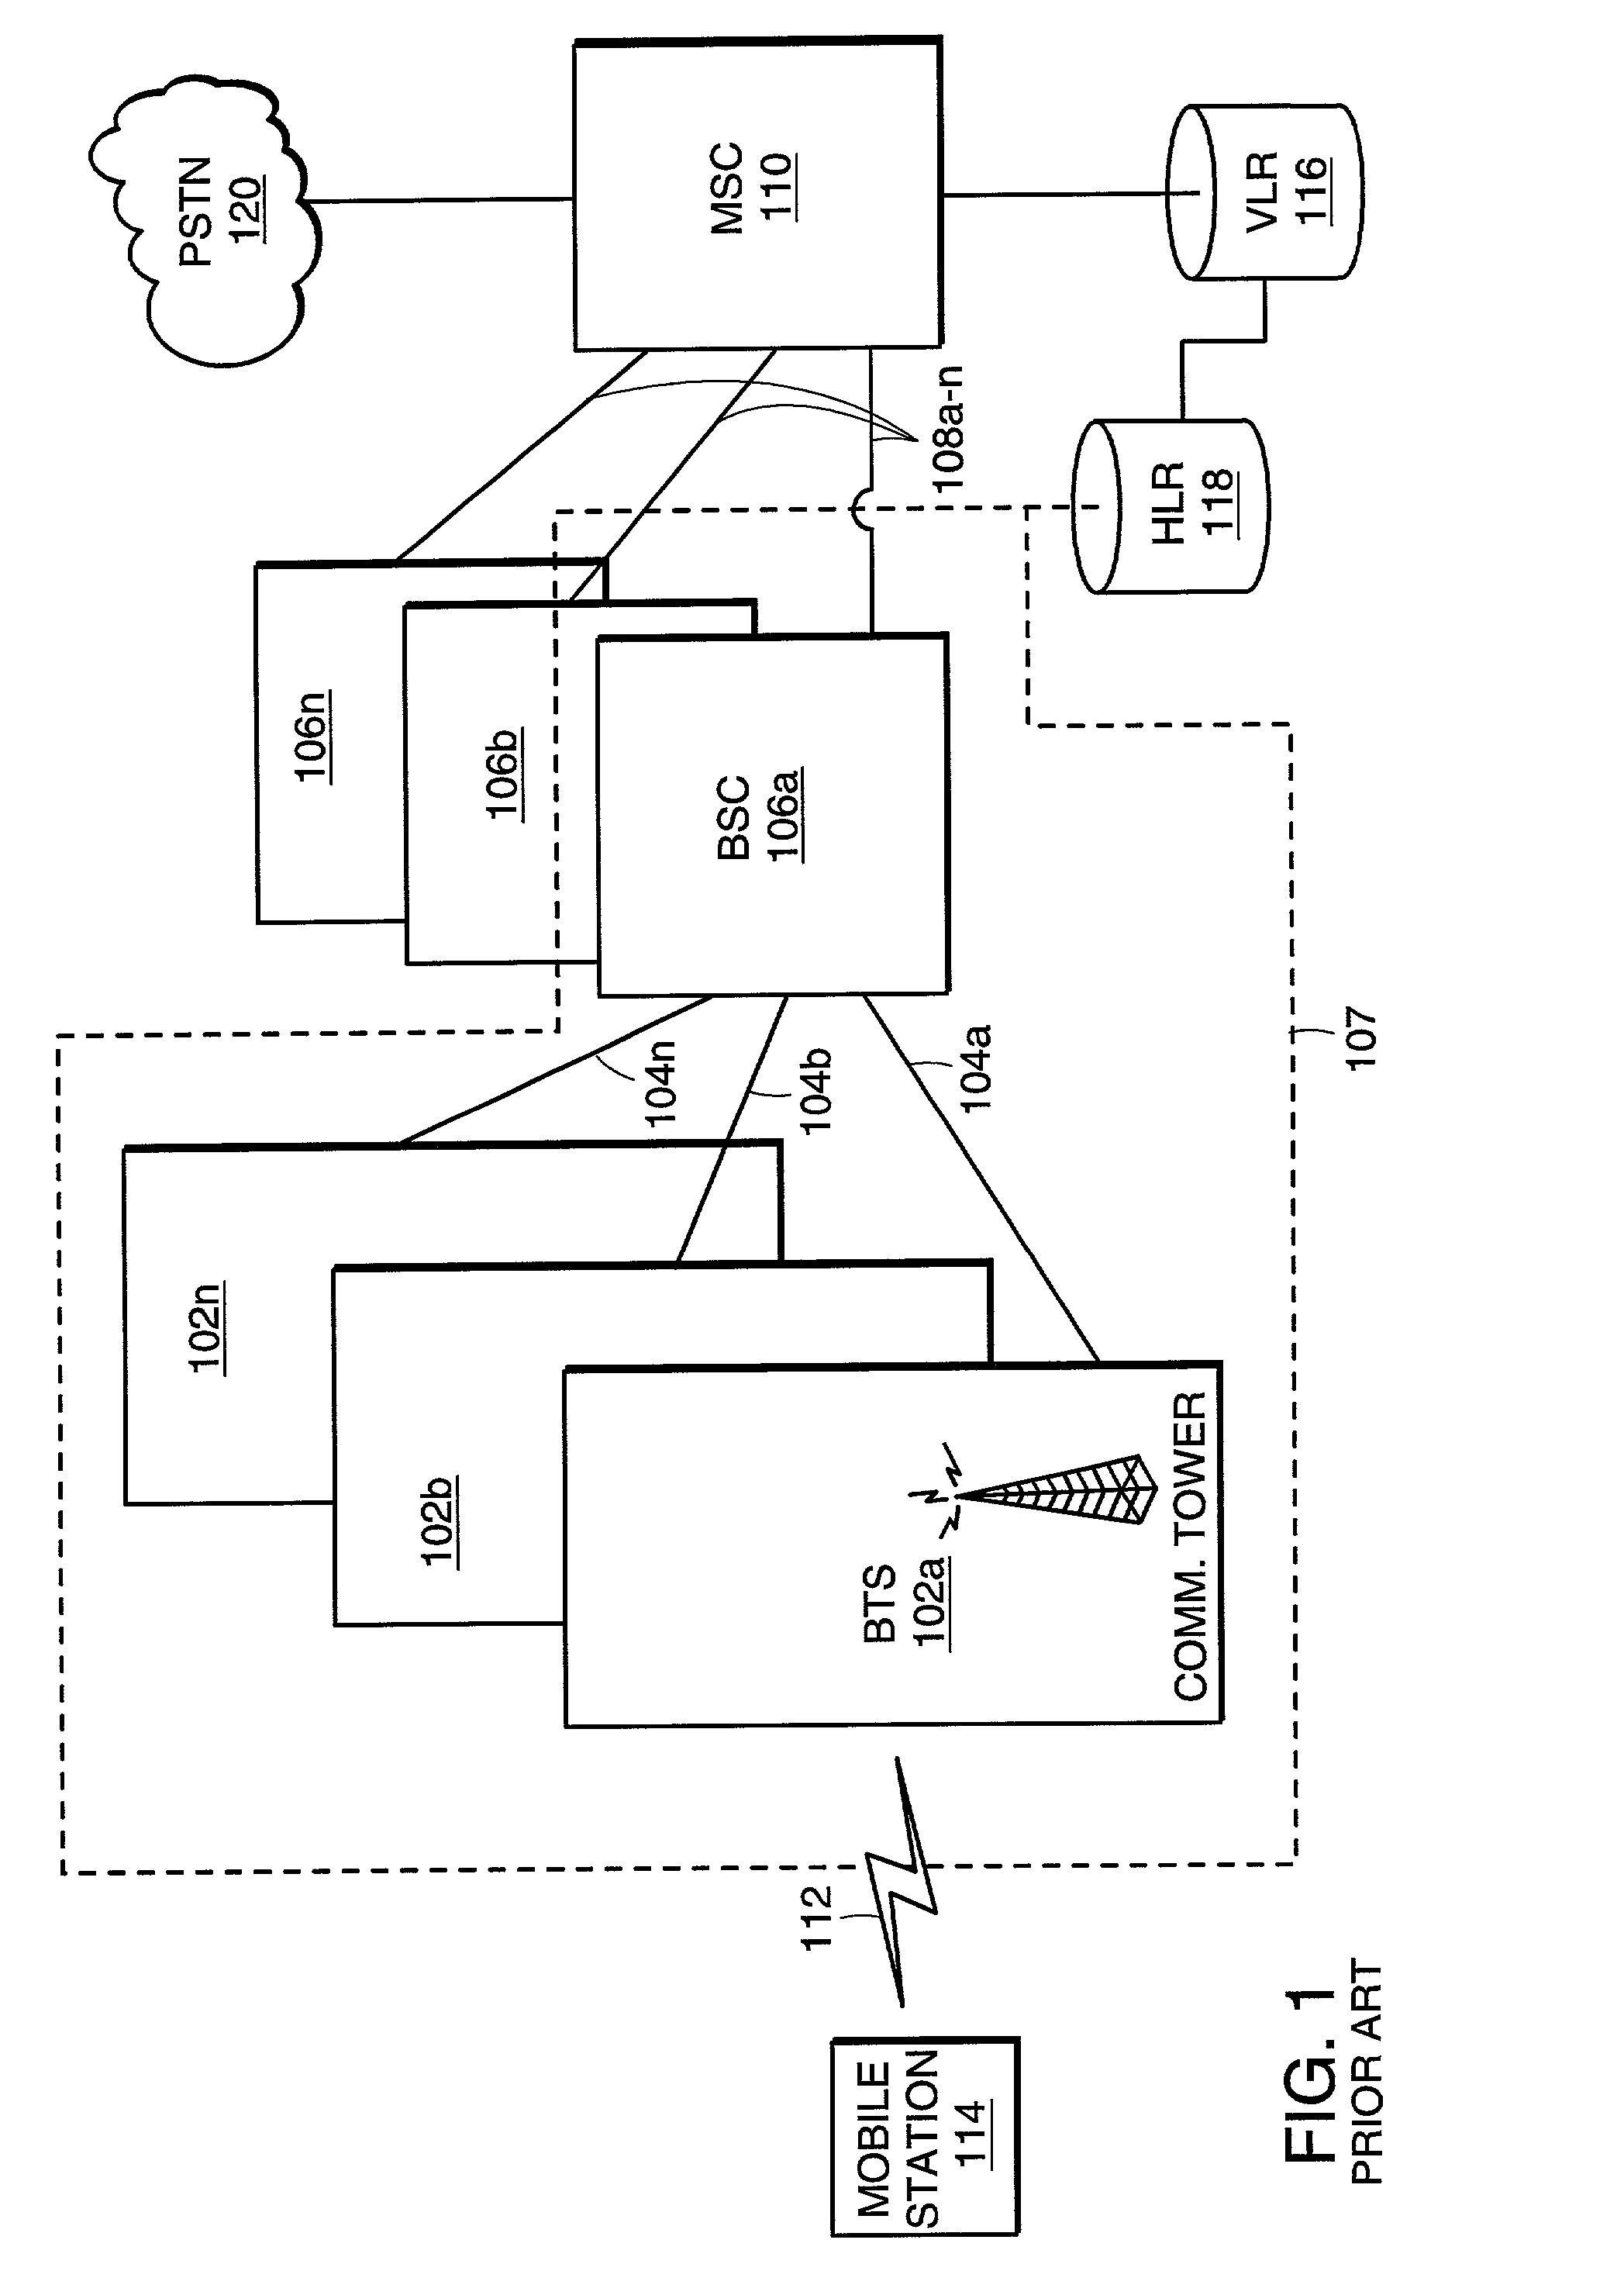 System and method of group calling in mobile communications